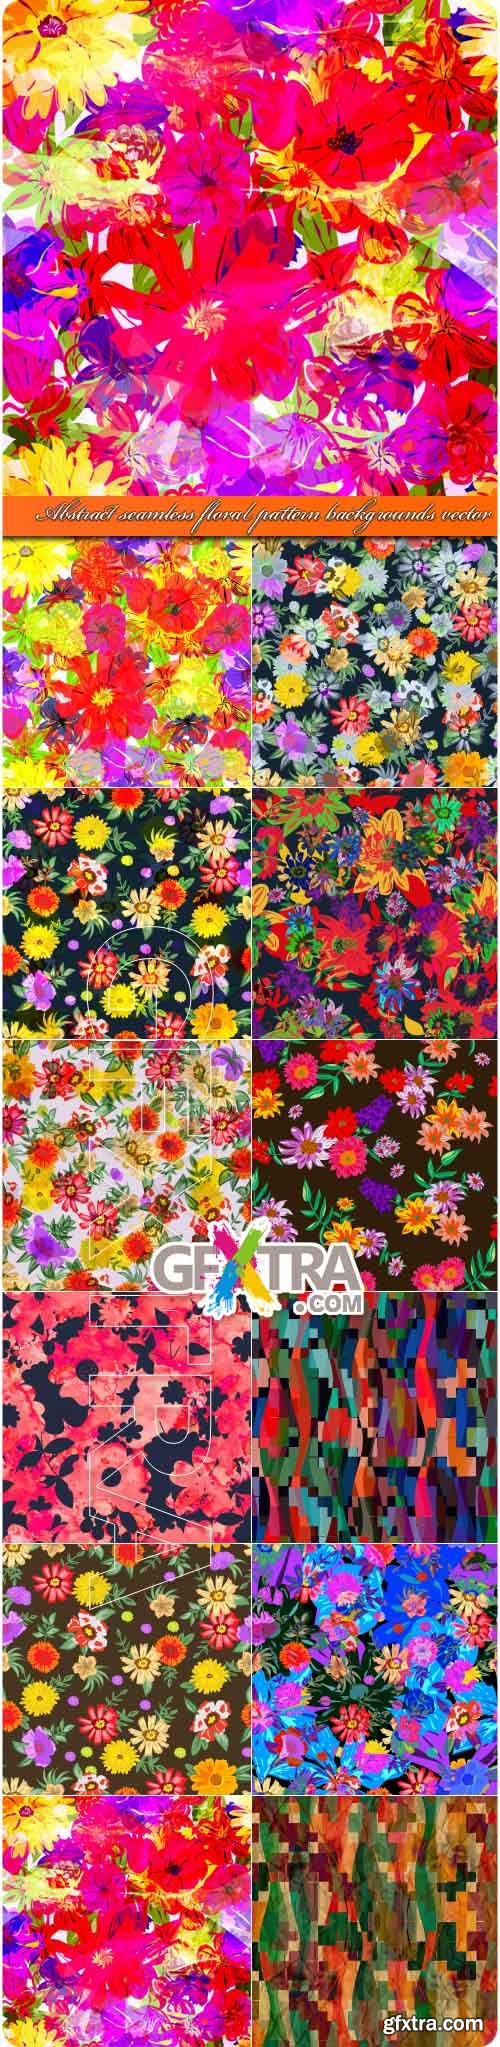 Abstract seamless floral pattern backgrounds vector